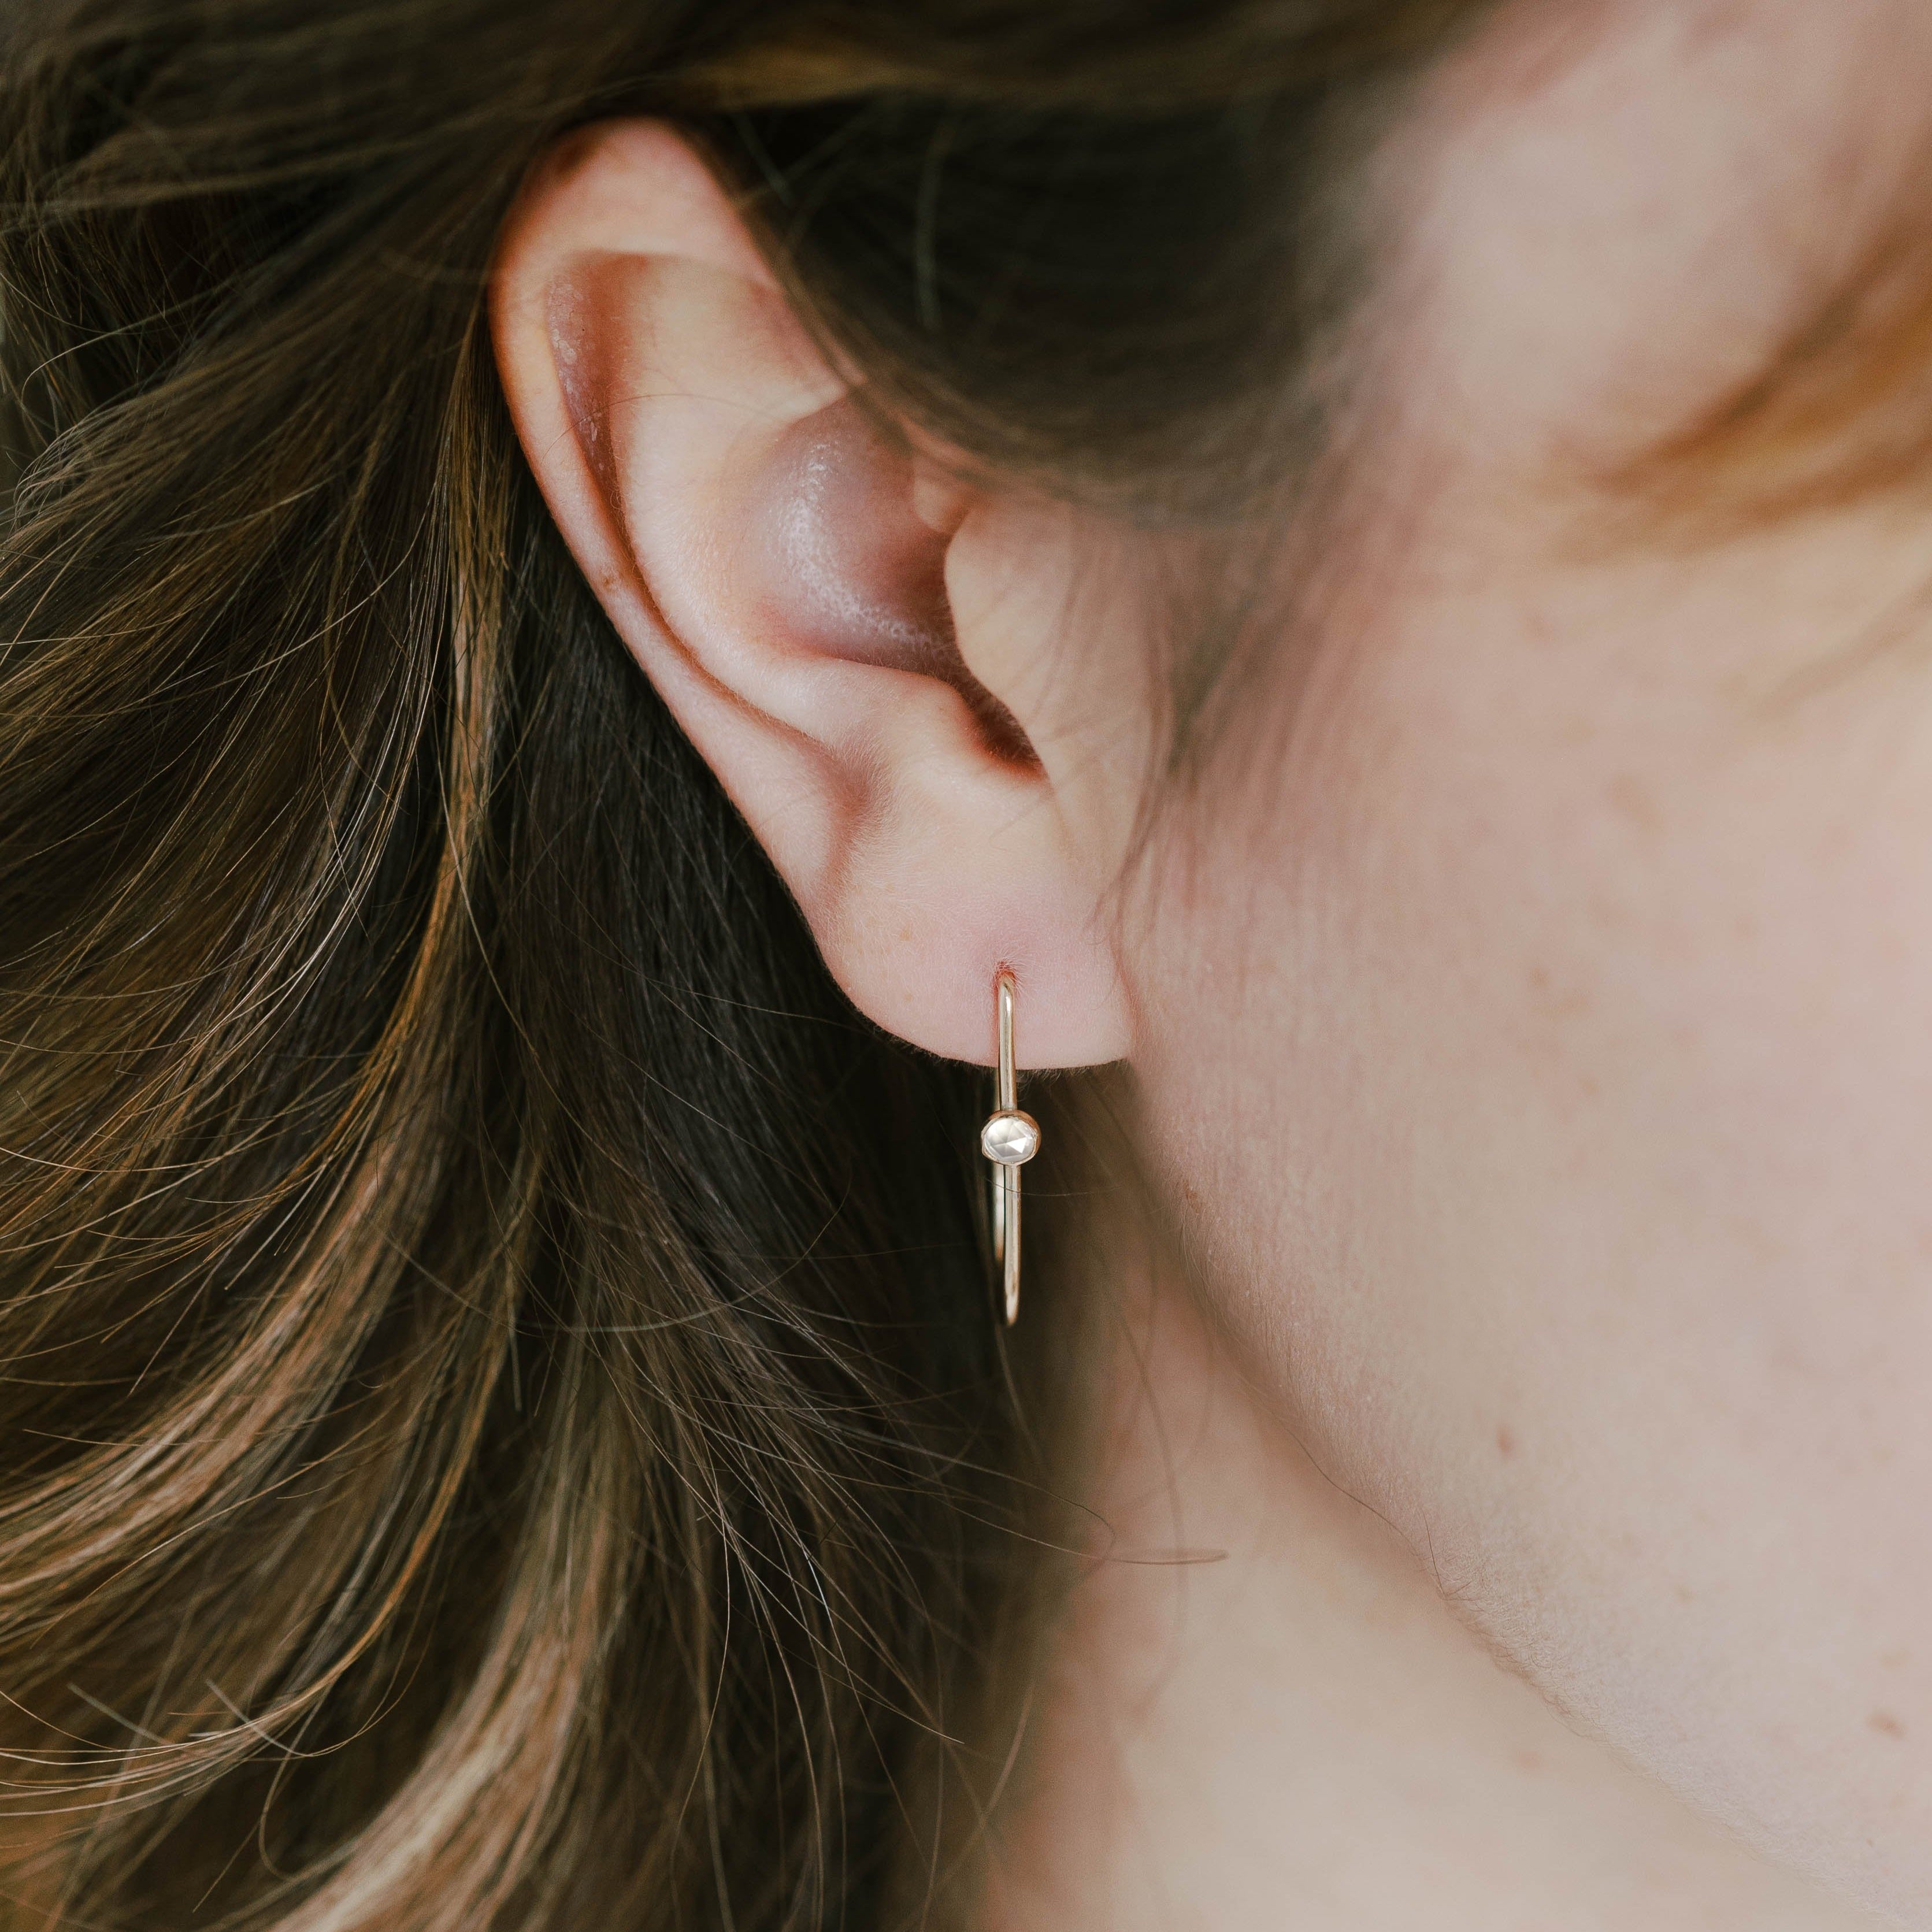 Delicate gold hoop earrings made with a small 3mm white topaz gemstone and recycled 14k yellow gold. These are perfect to wear for any occasion.